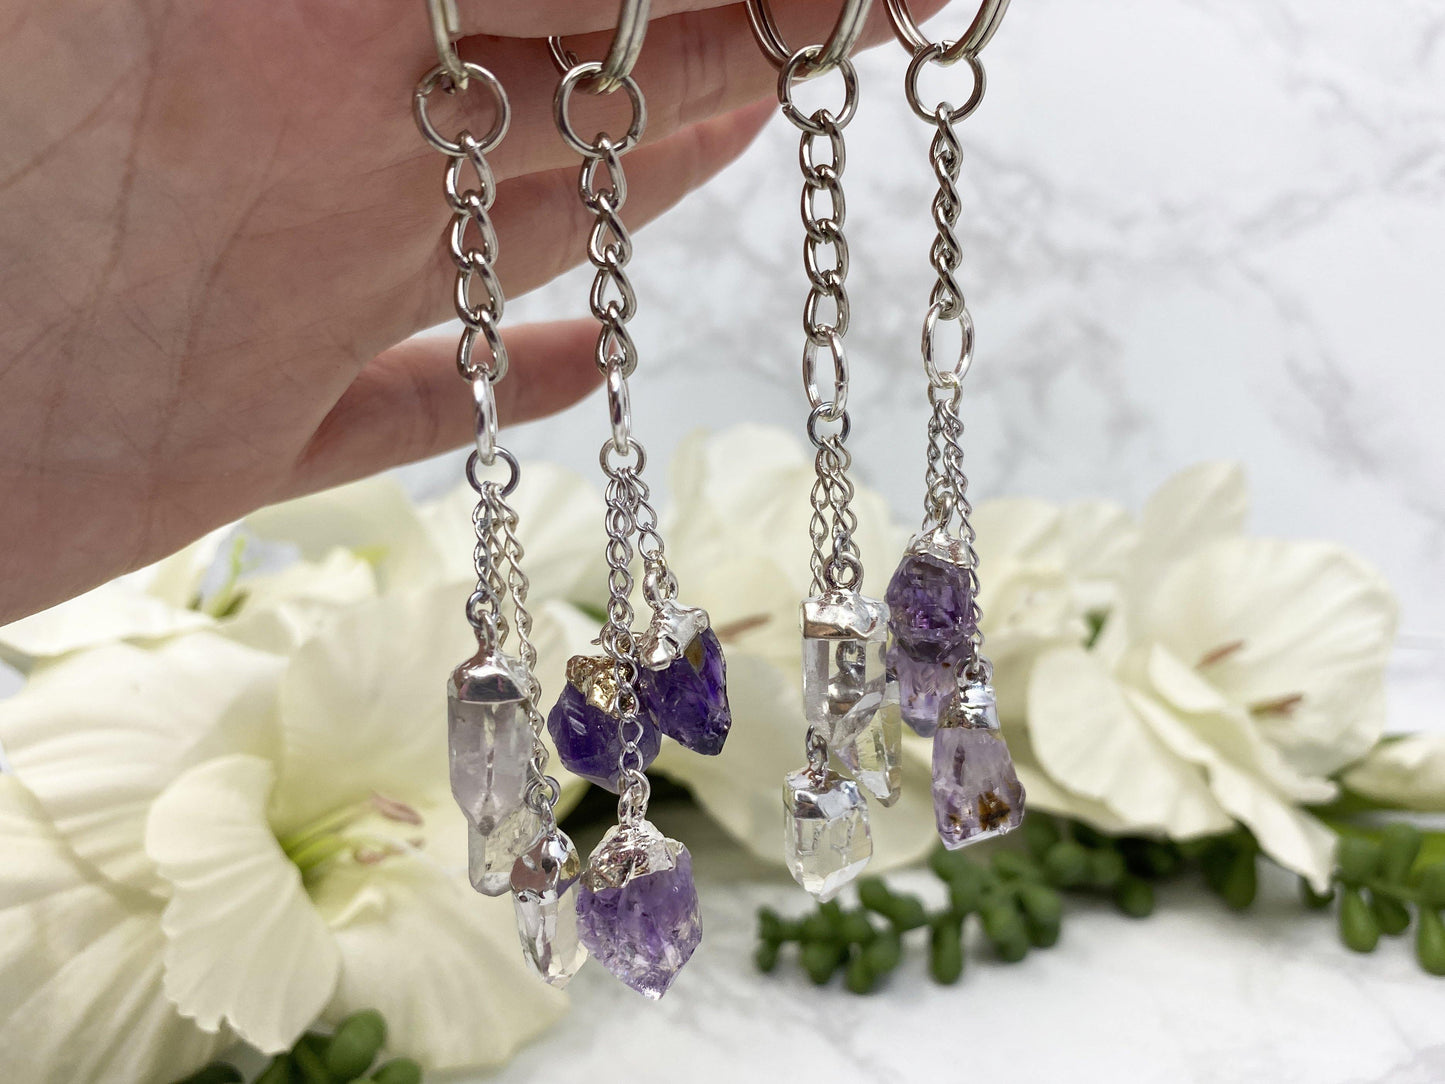 Silver plated clear quartz and amethyst crystal point keychains.